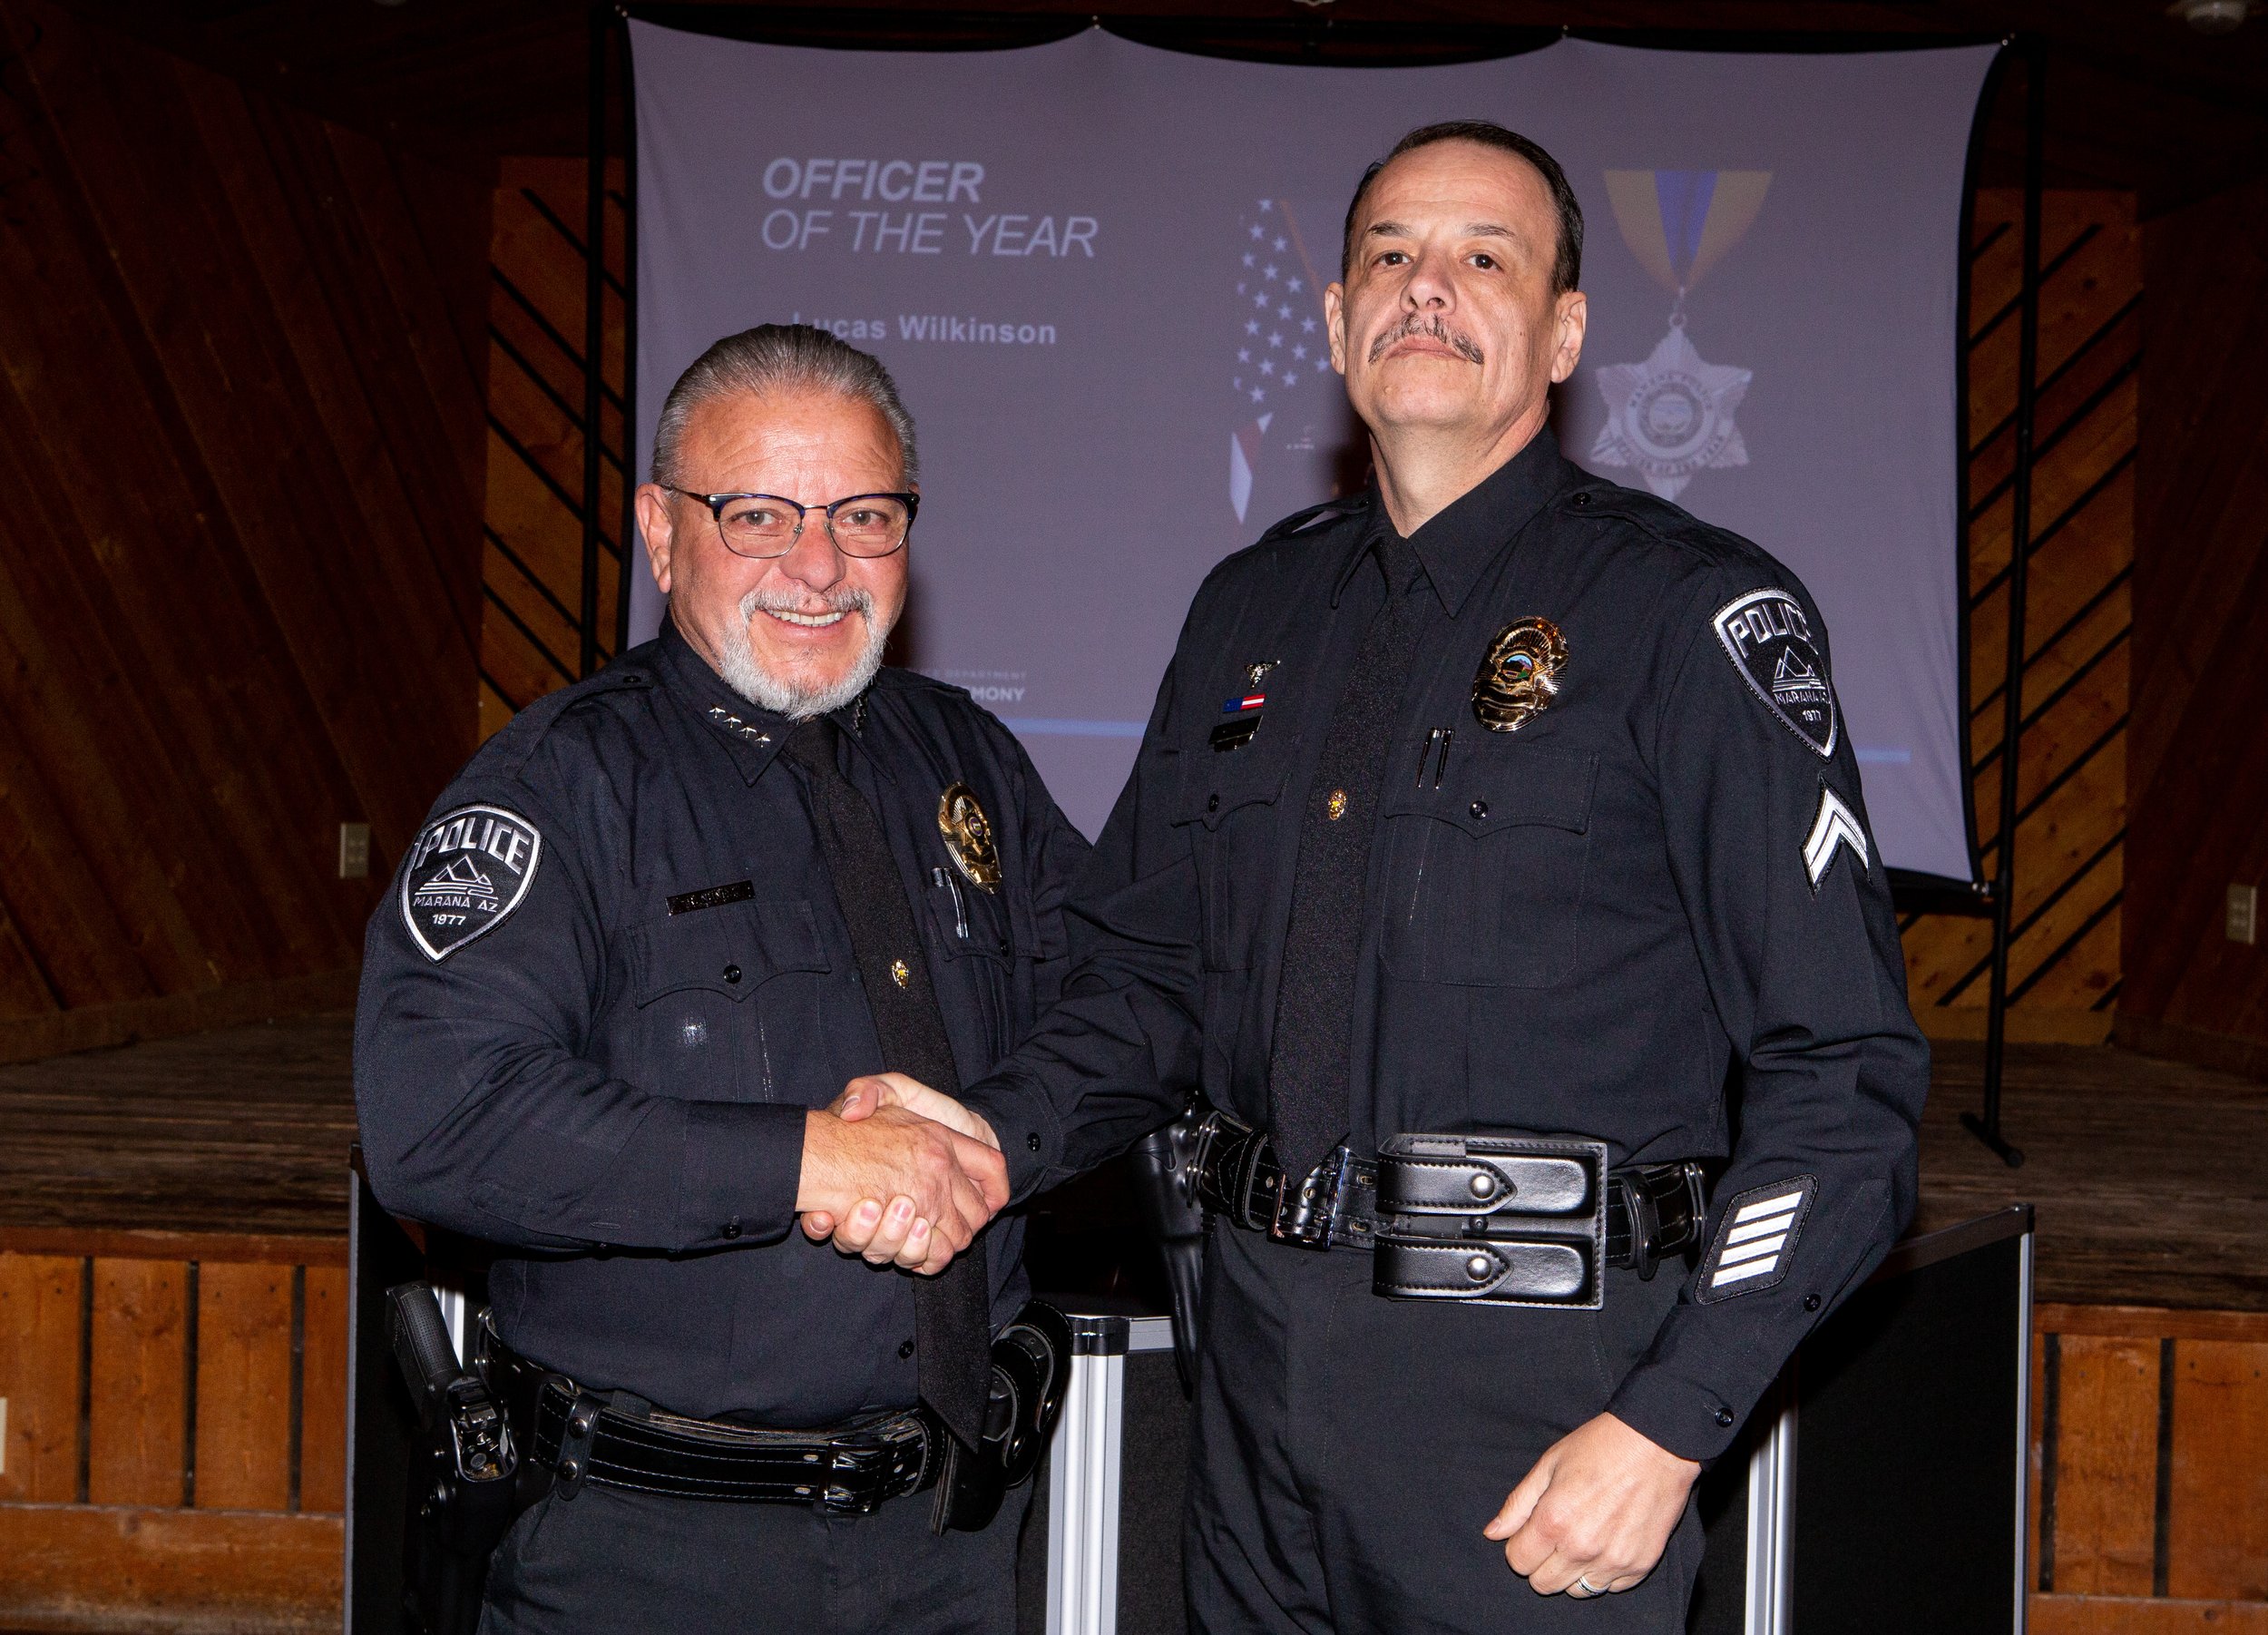  Officer of the Year: Officer Lucas Wilkinson with Chief Nunez 